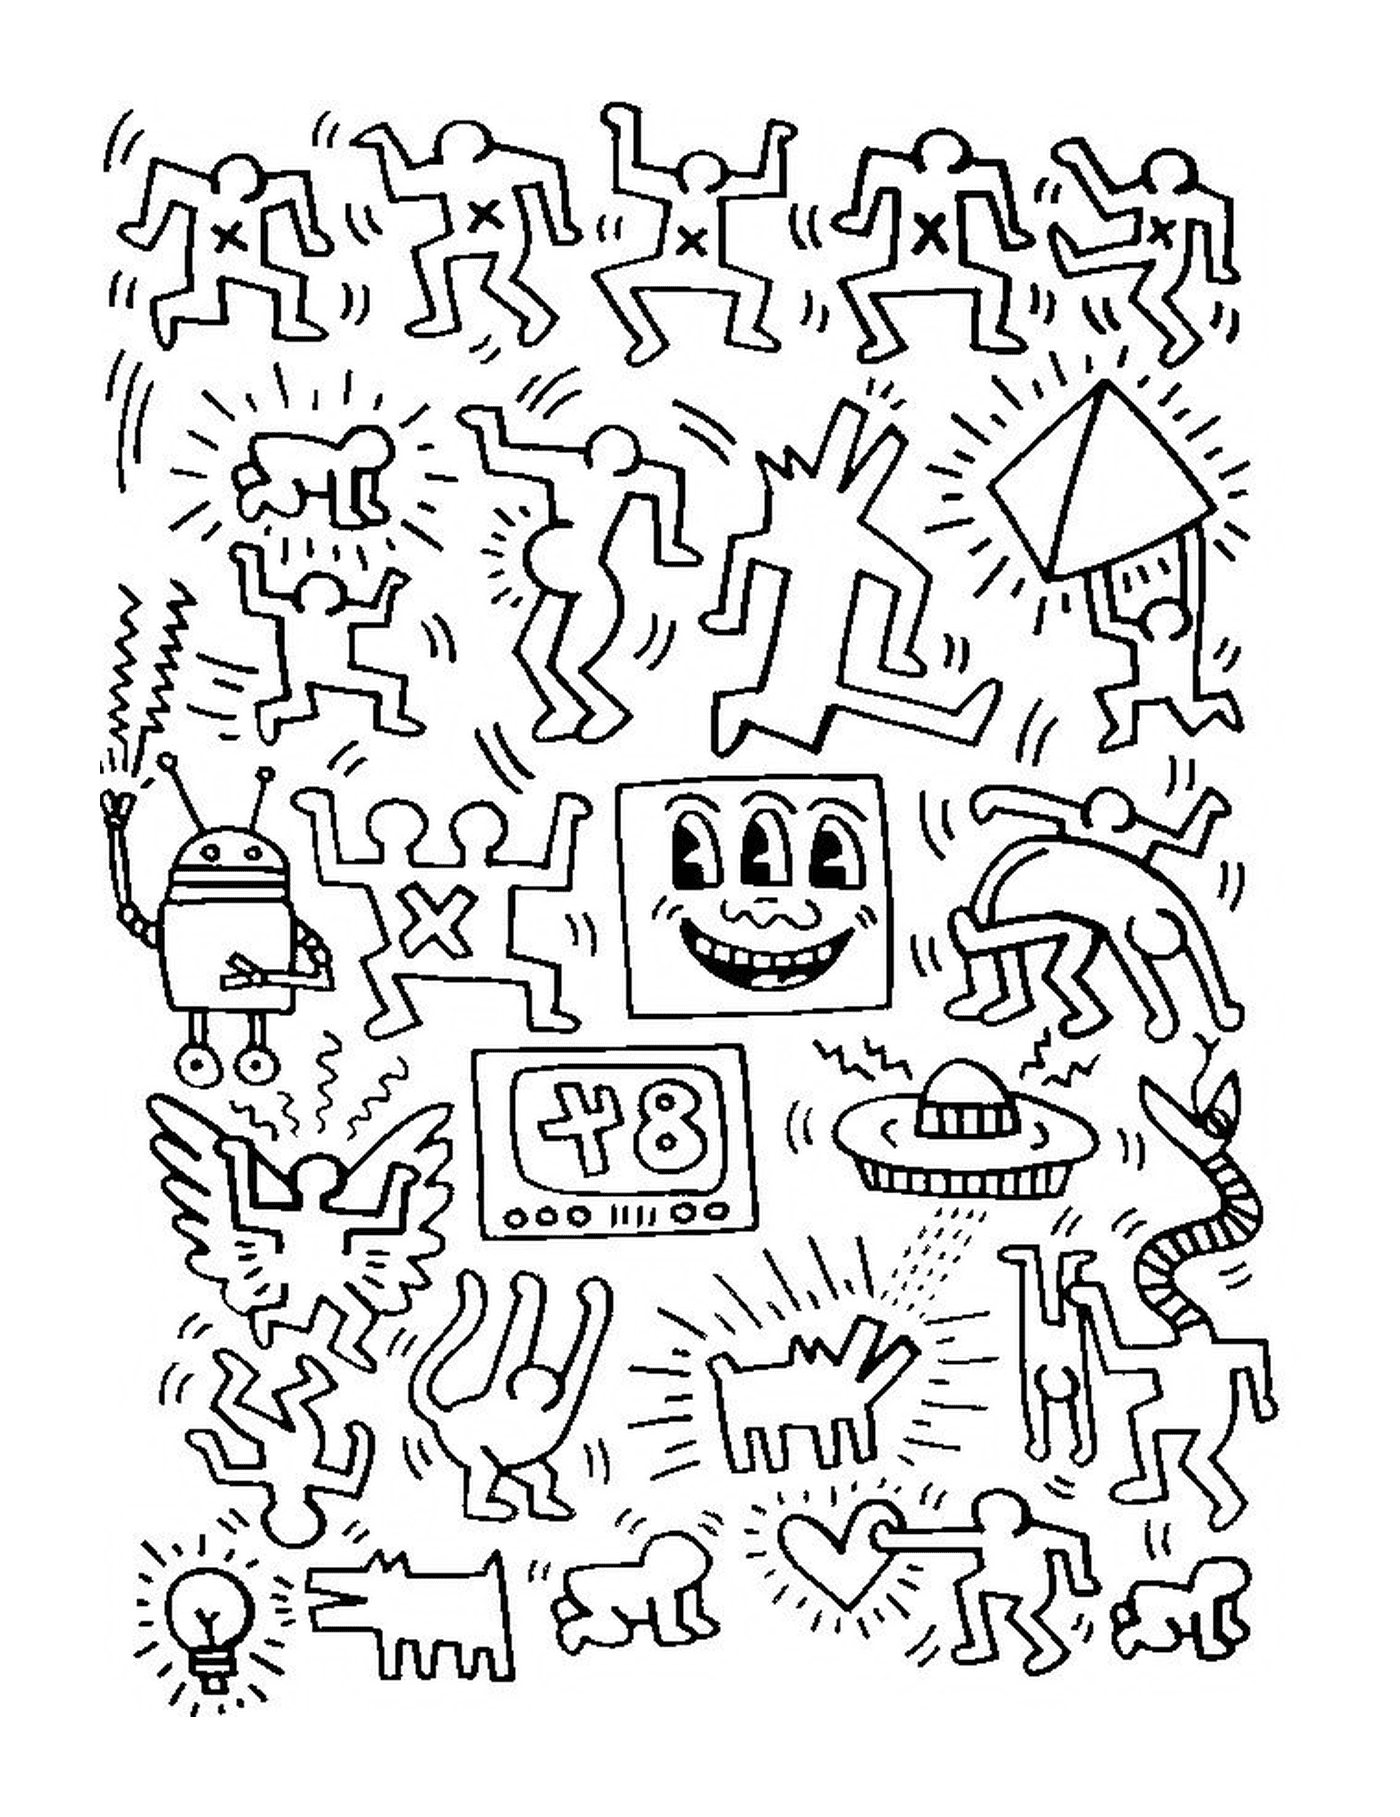  a group of people according to Keith Haring 